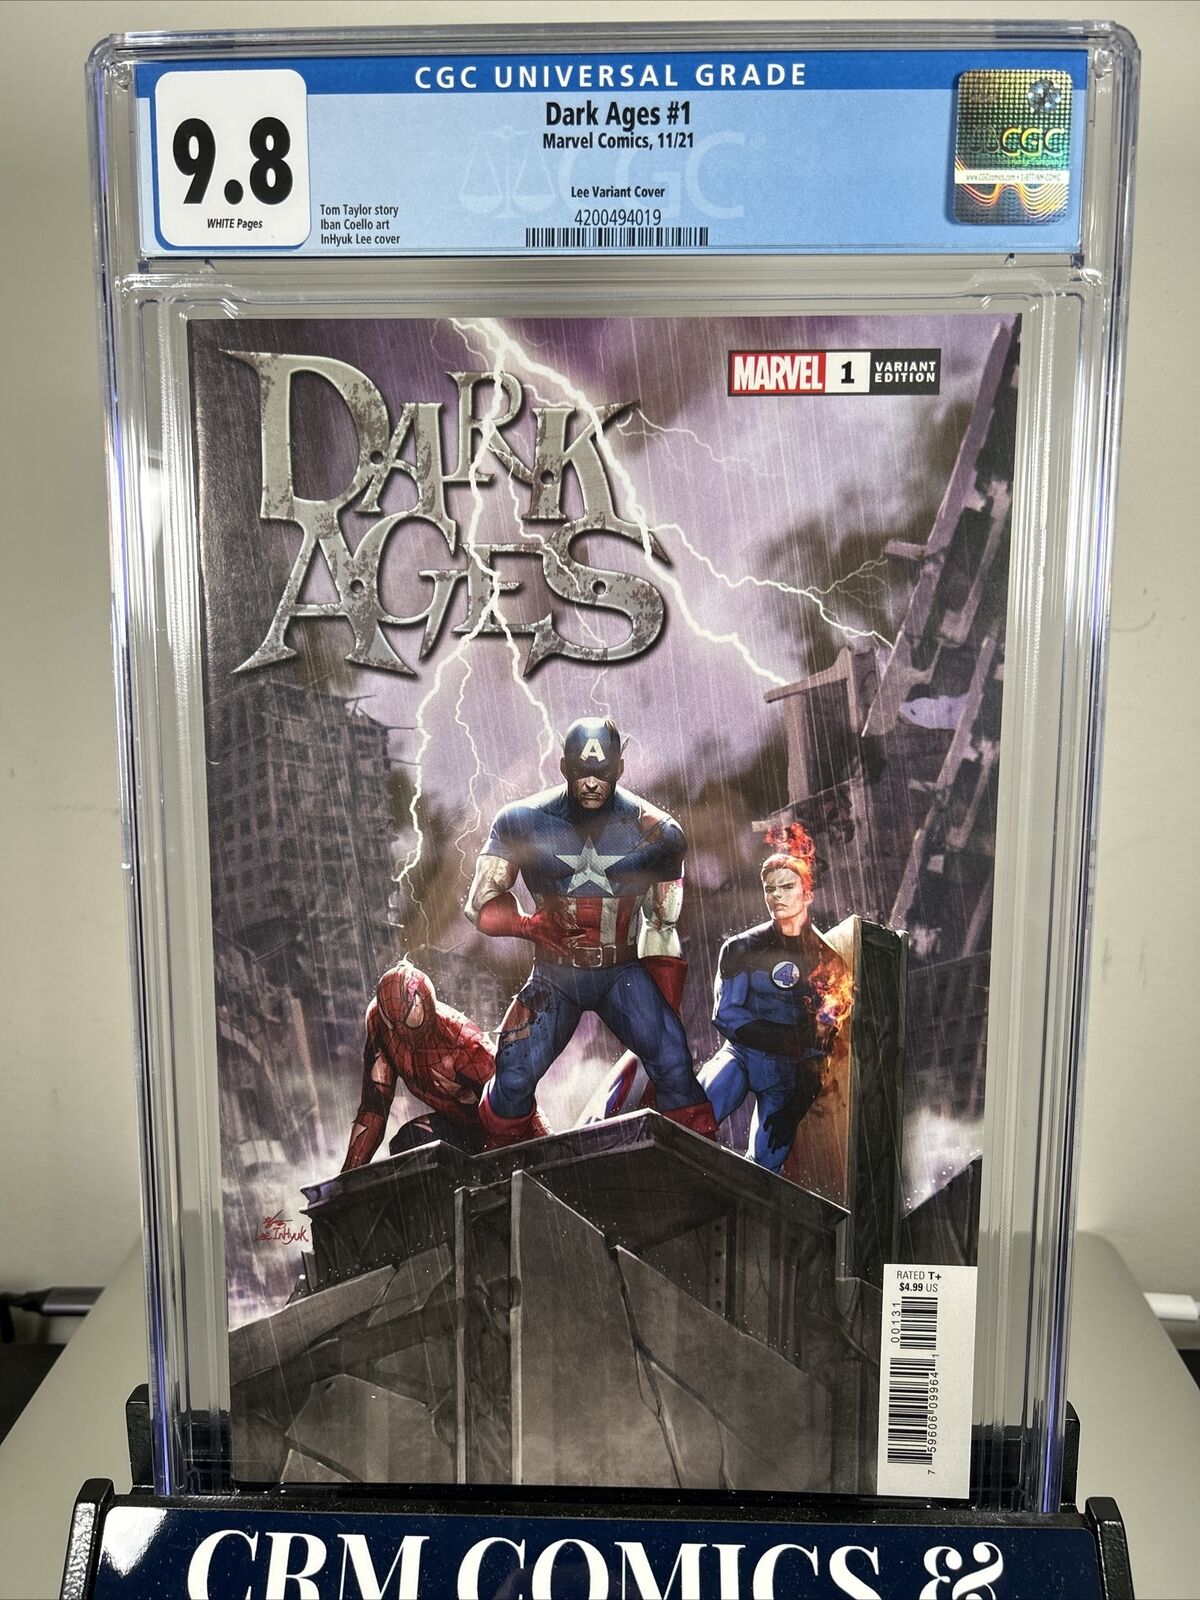 Marvel Dark Ages 1 Lee Variant Cover CGC 9.8